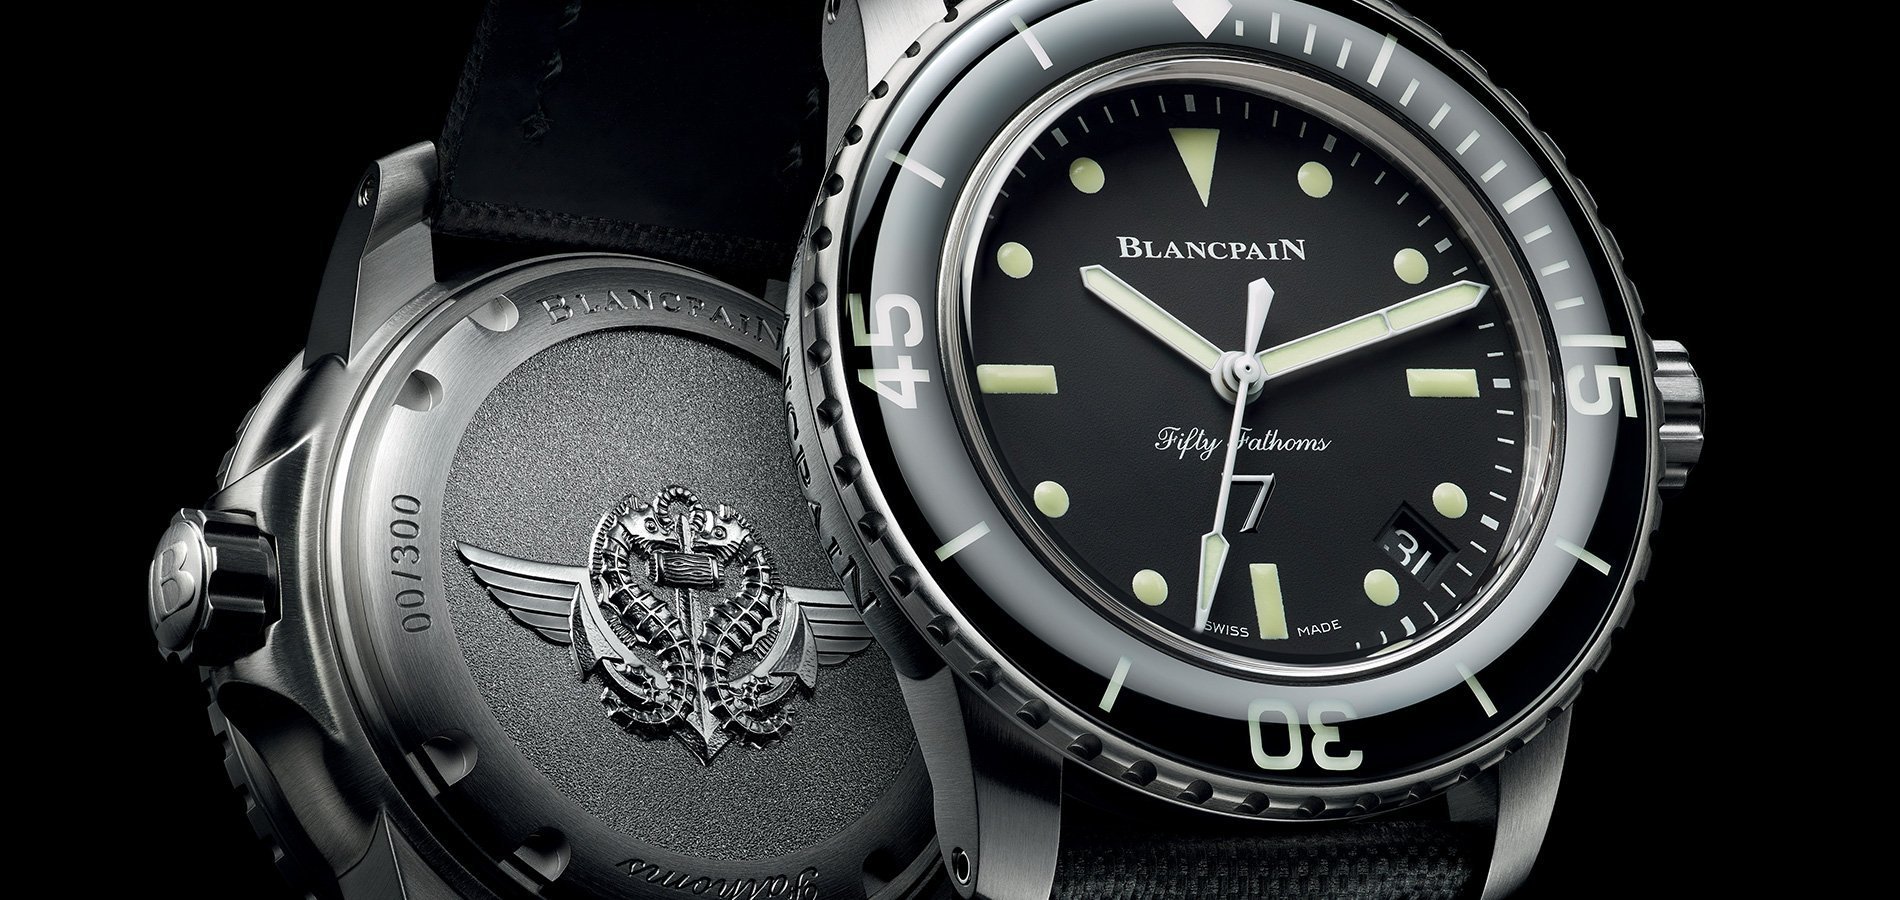 Blancpain A Fifty Fathoms honouring French Combat Swimmers